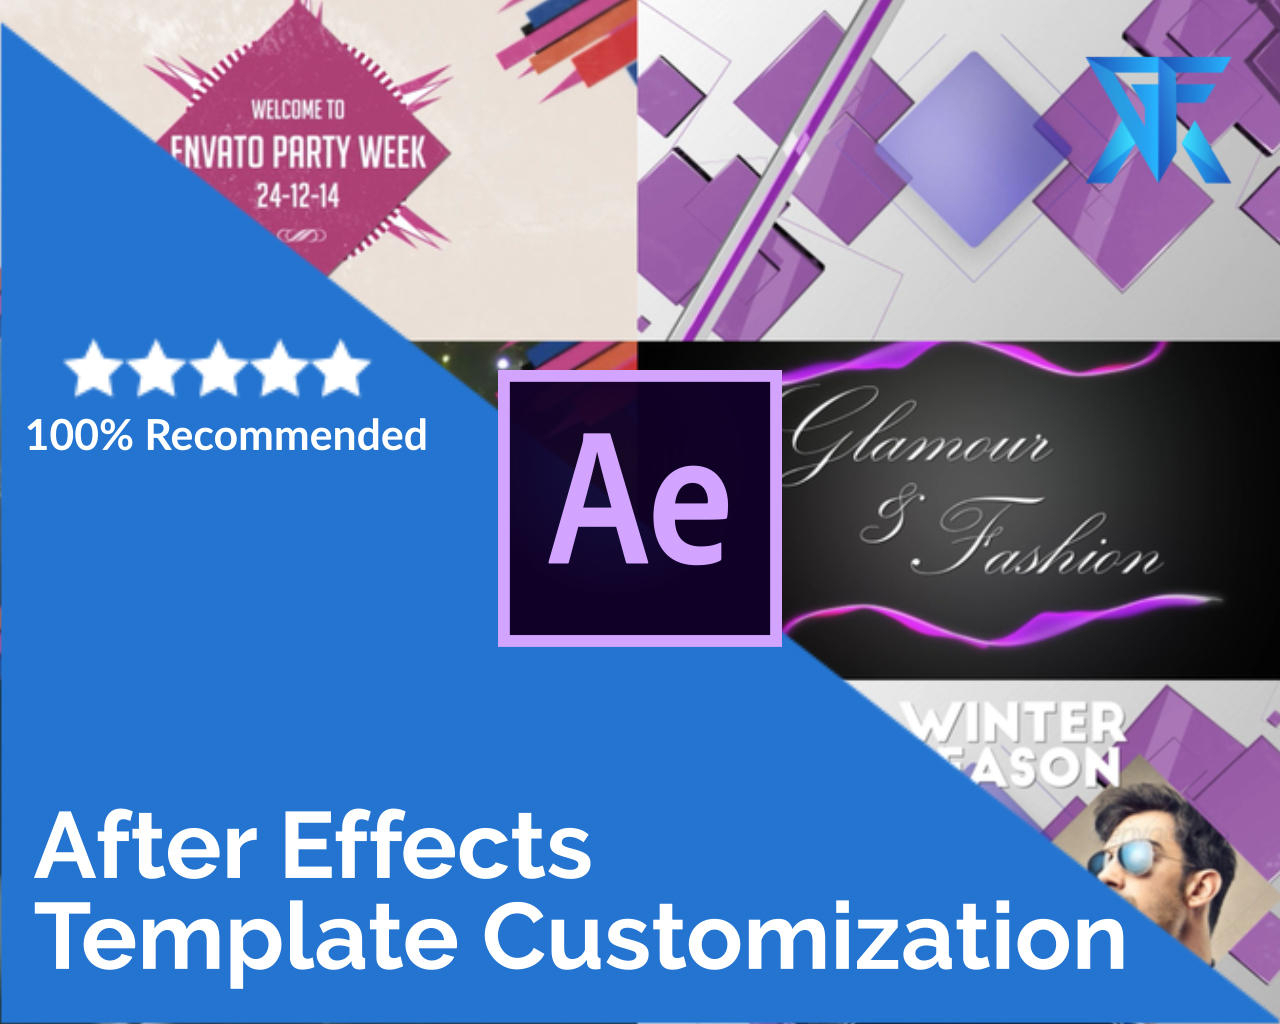 Envato After Effects